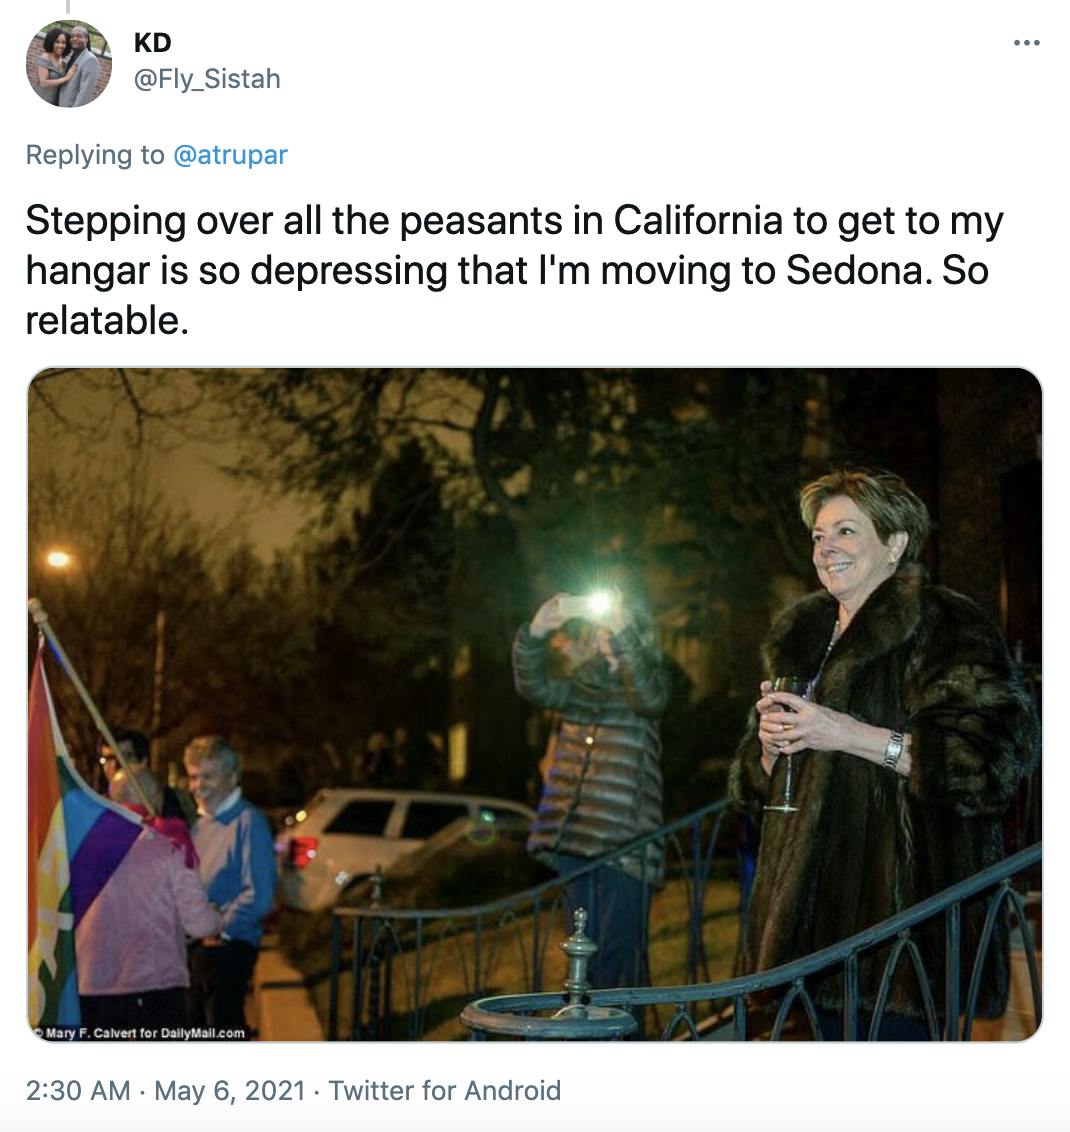 'Stepping over all the peasants in California to get to my hangar is so depressing that I'm moving to Sedona. So relatable.' picture of an older white woman with short dark hair in a fur coat, smirking as she drinks champagne looking down on people with a flag